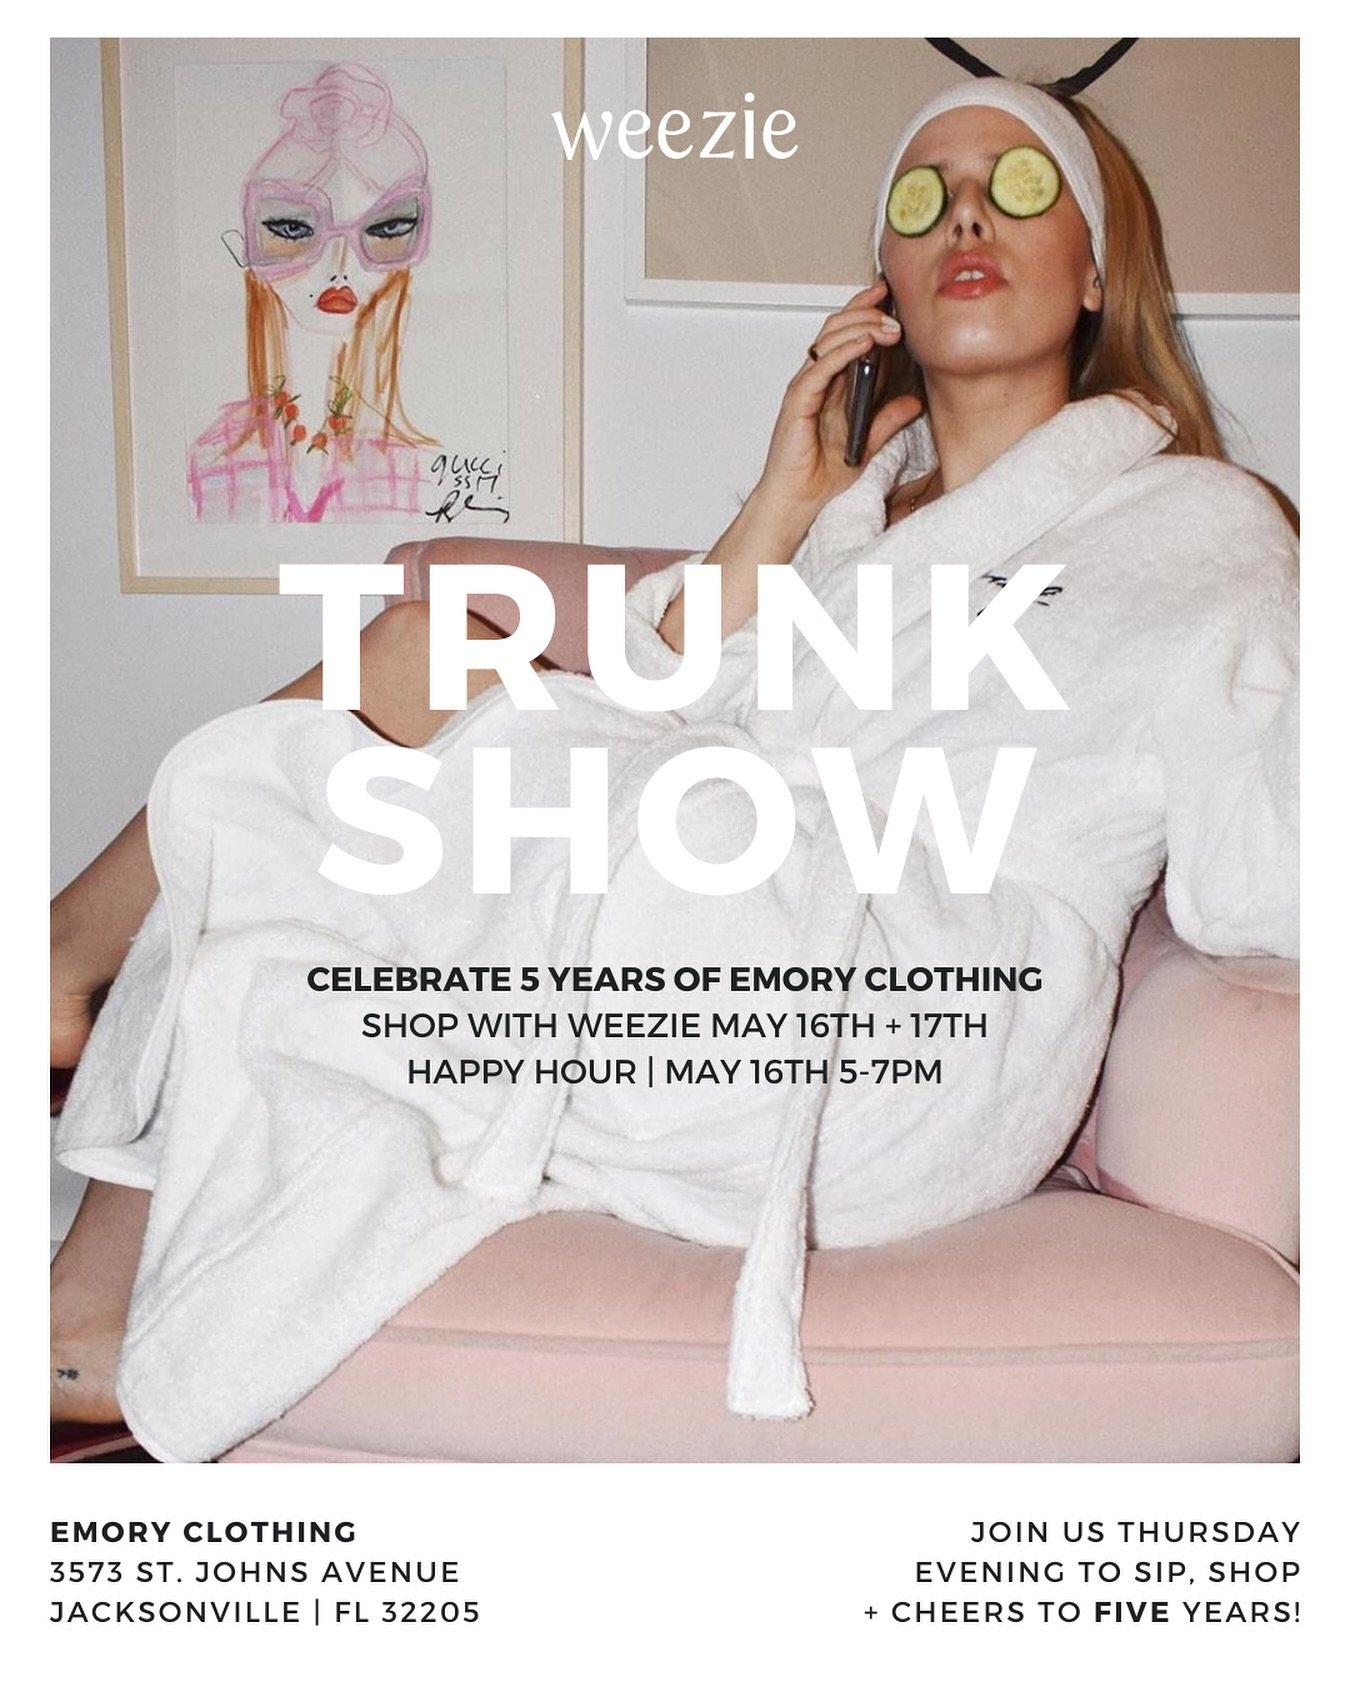 let&rsquo;s celebrate FIVE years of Emory with a trunk show !!! WEEZIE x EMORY &mdash; shop a wide range of Weezie products + place your custom orders with our special guest, May 16-17 only !!! 

+ join us to sip and shop Thursday, May 16th from 5-7p